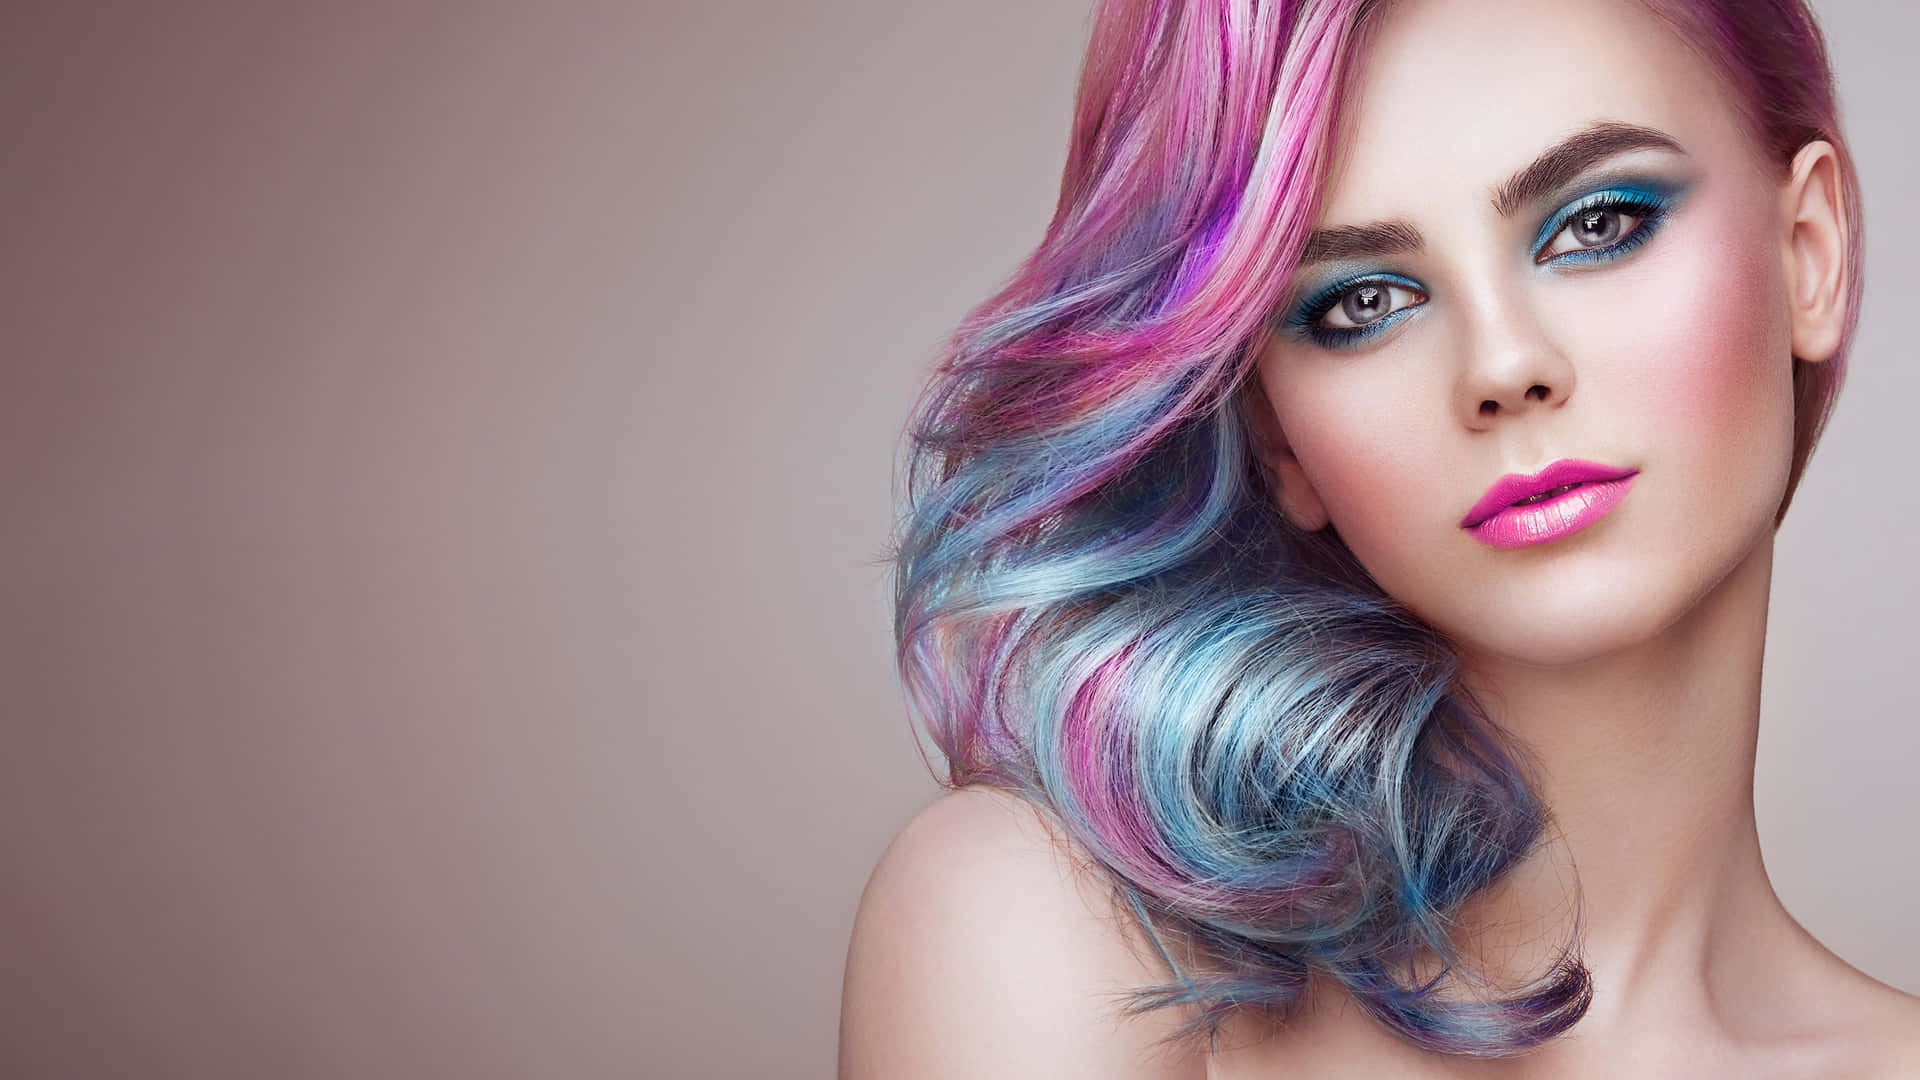 A Beautiful Woman With Colorful Hair